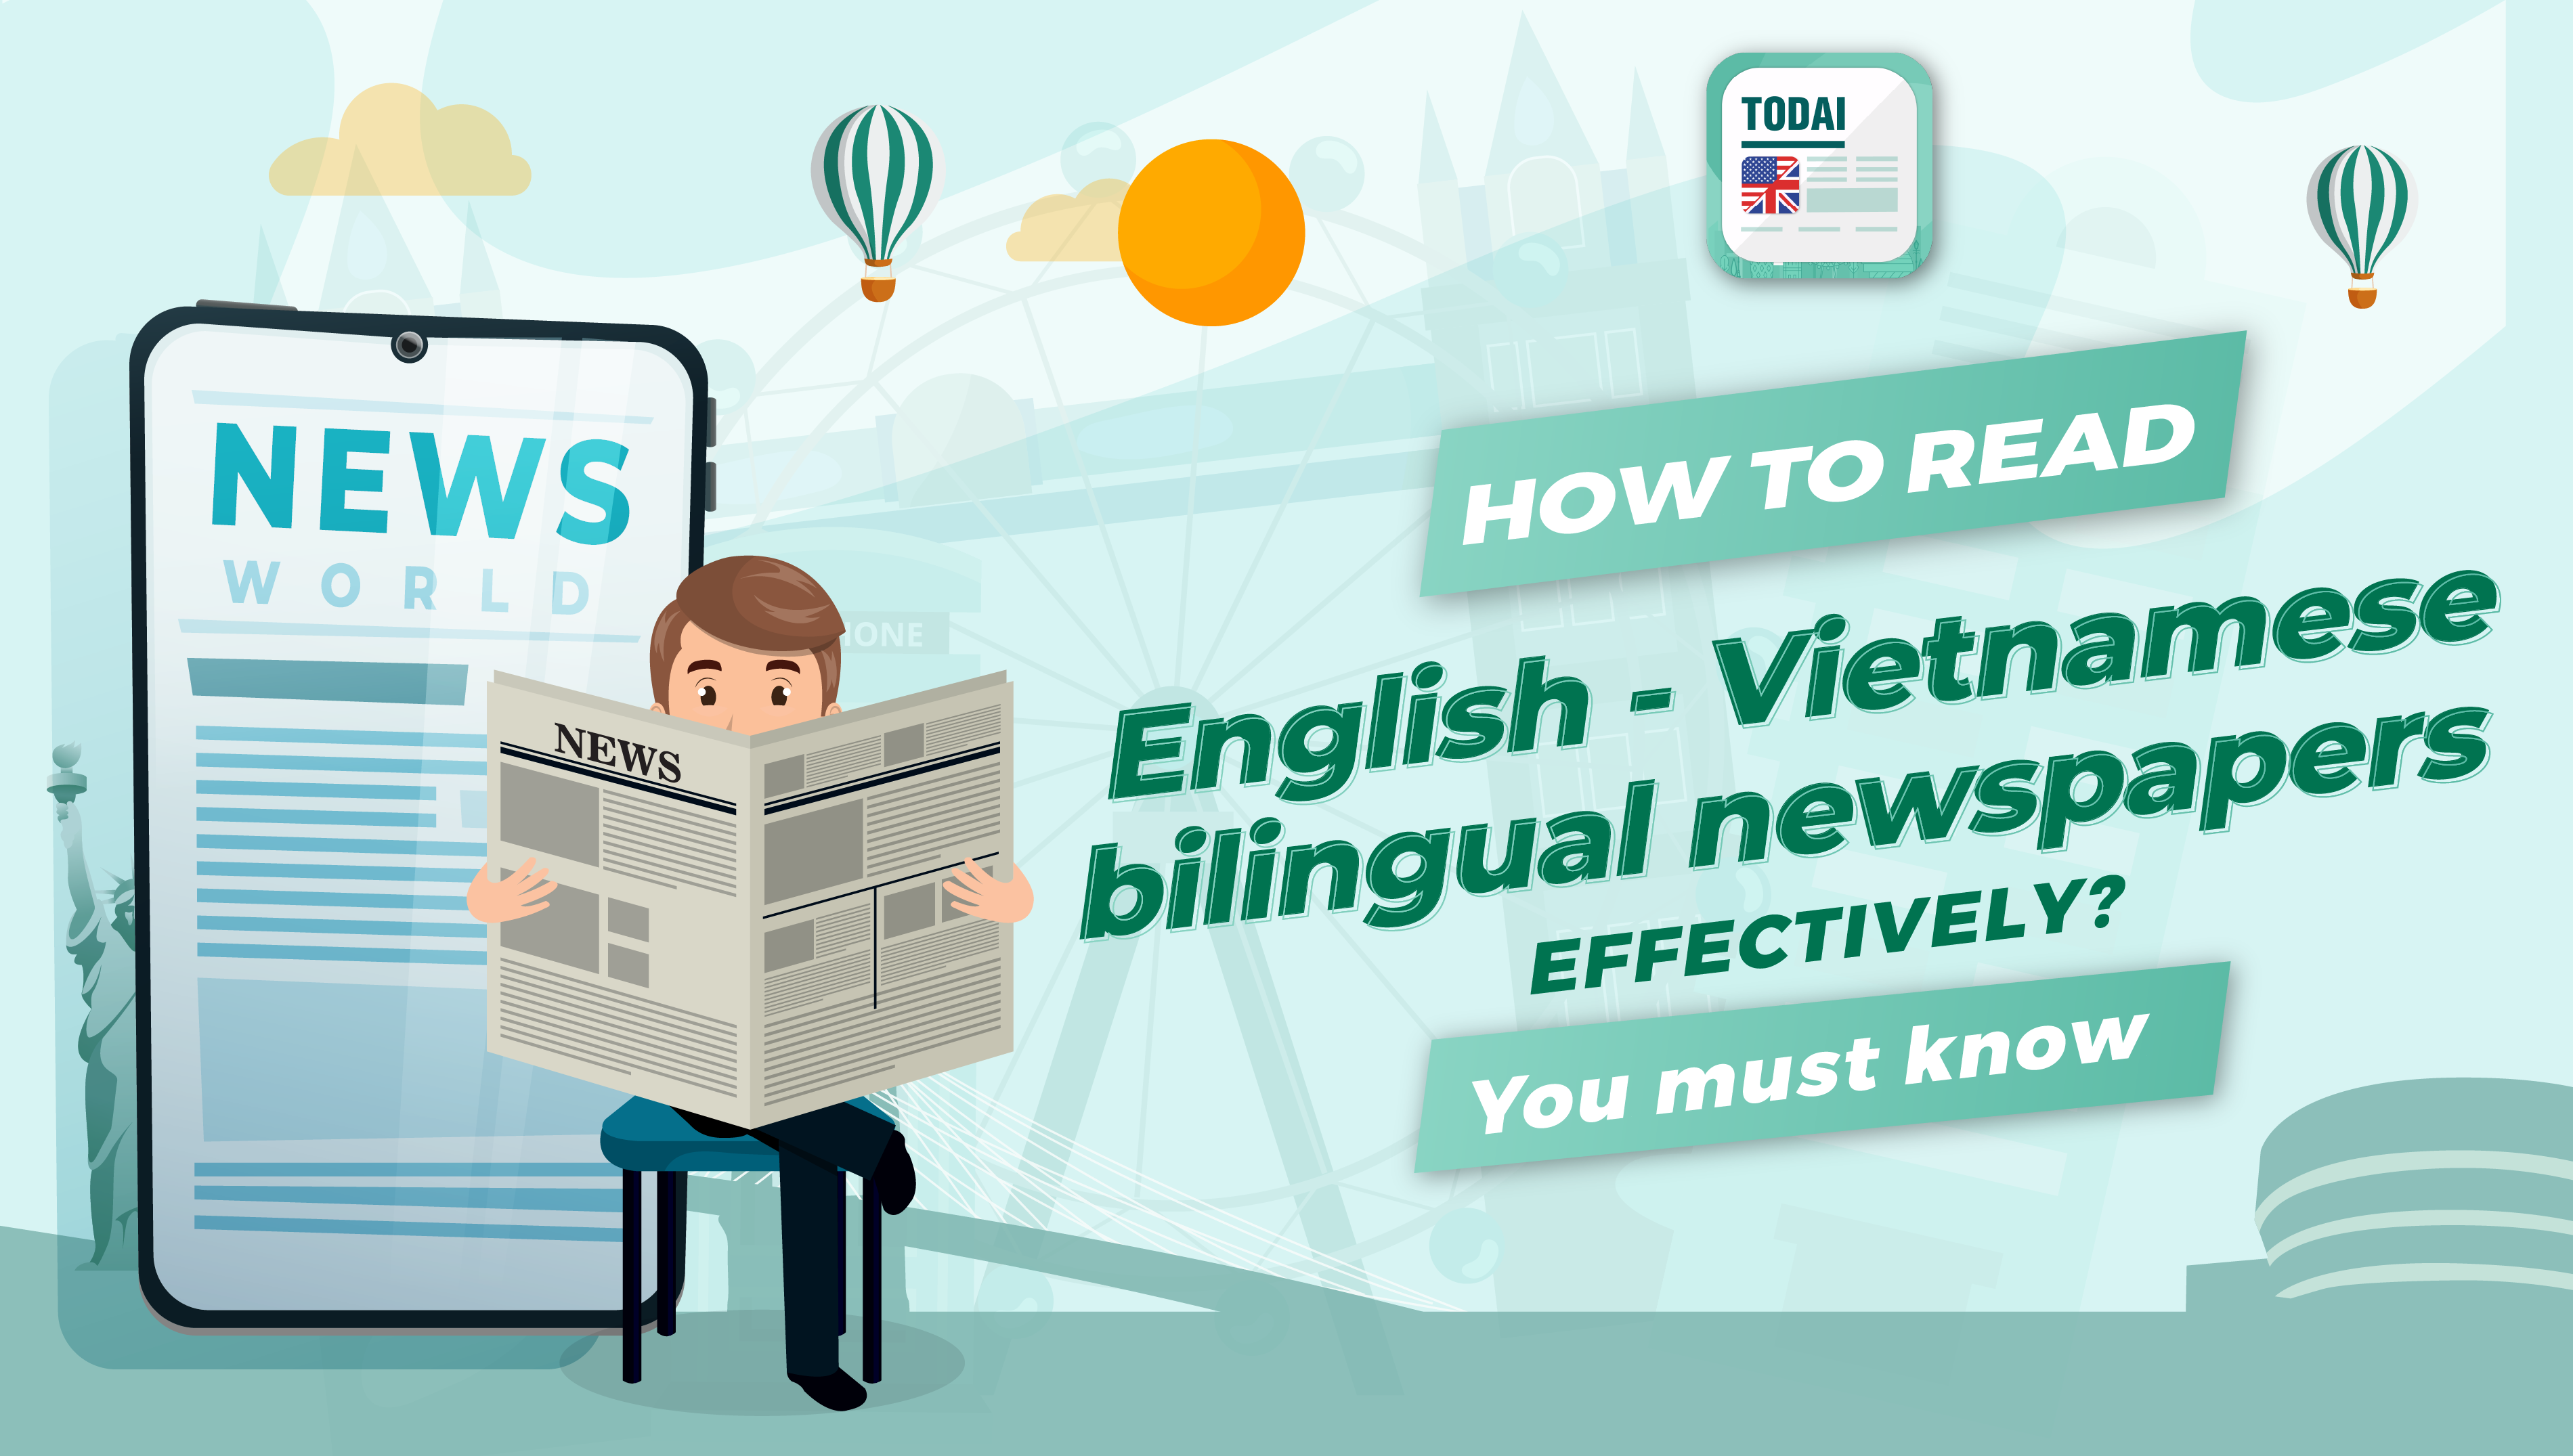 How to read English - Vietnamese bilingual newspapers effectively?